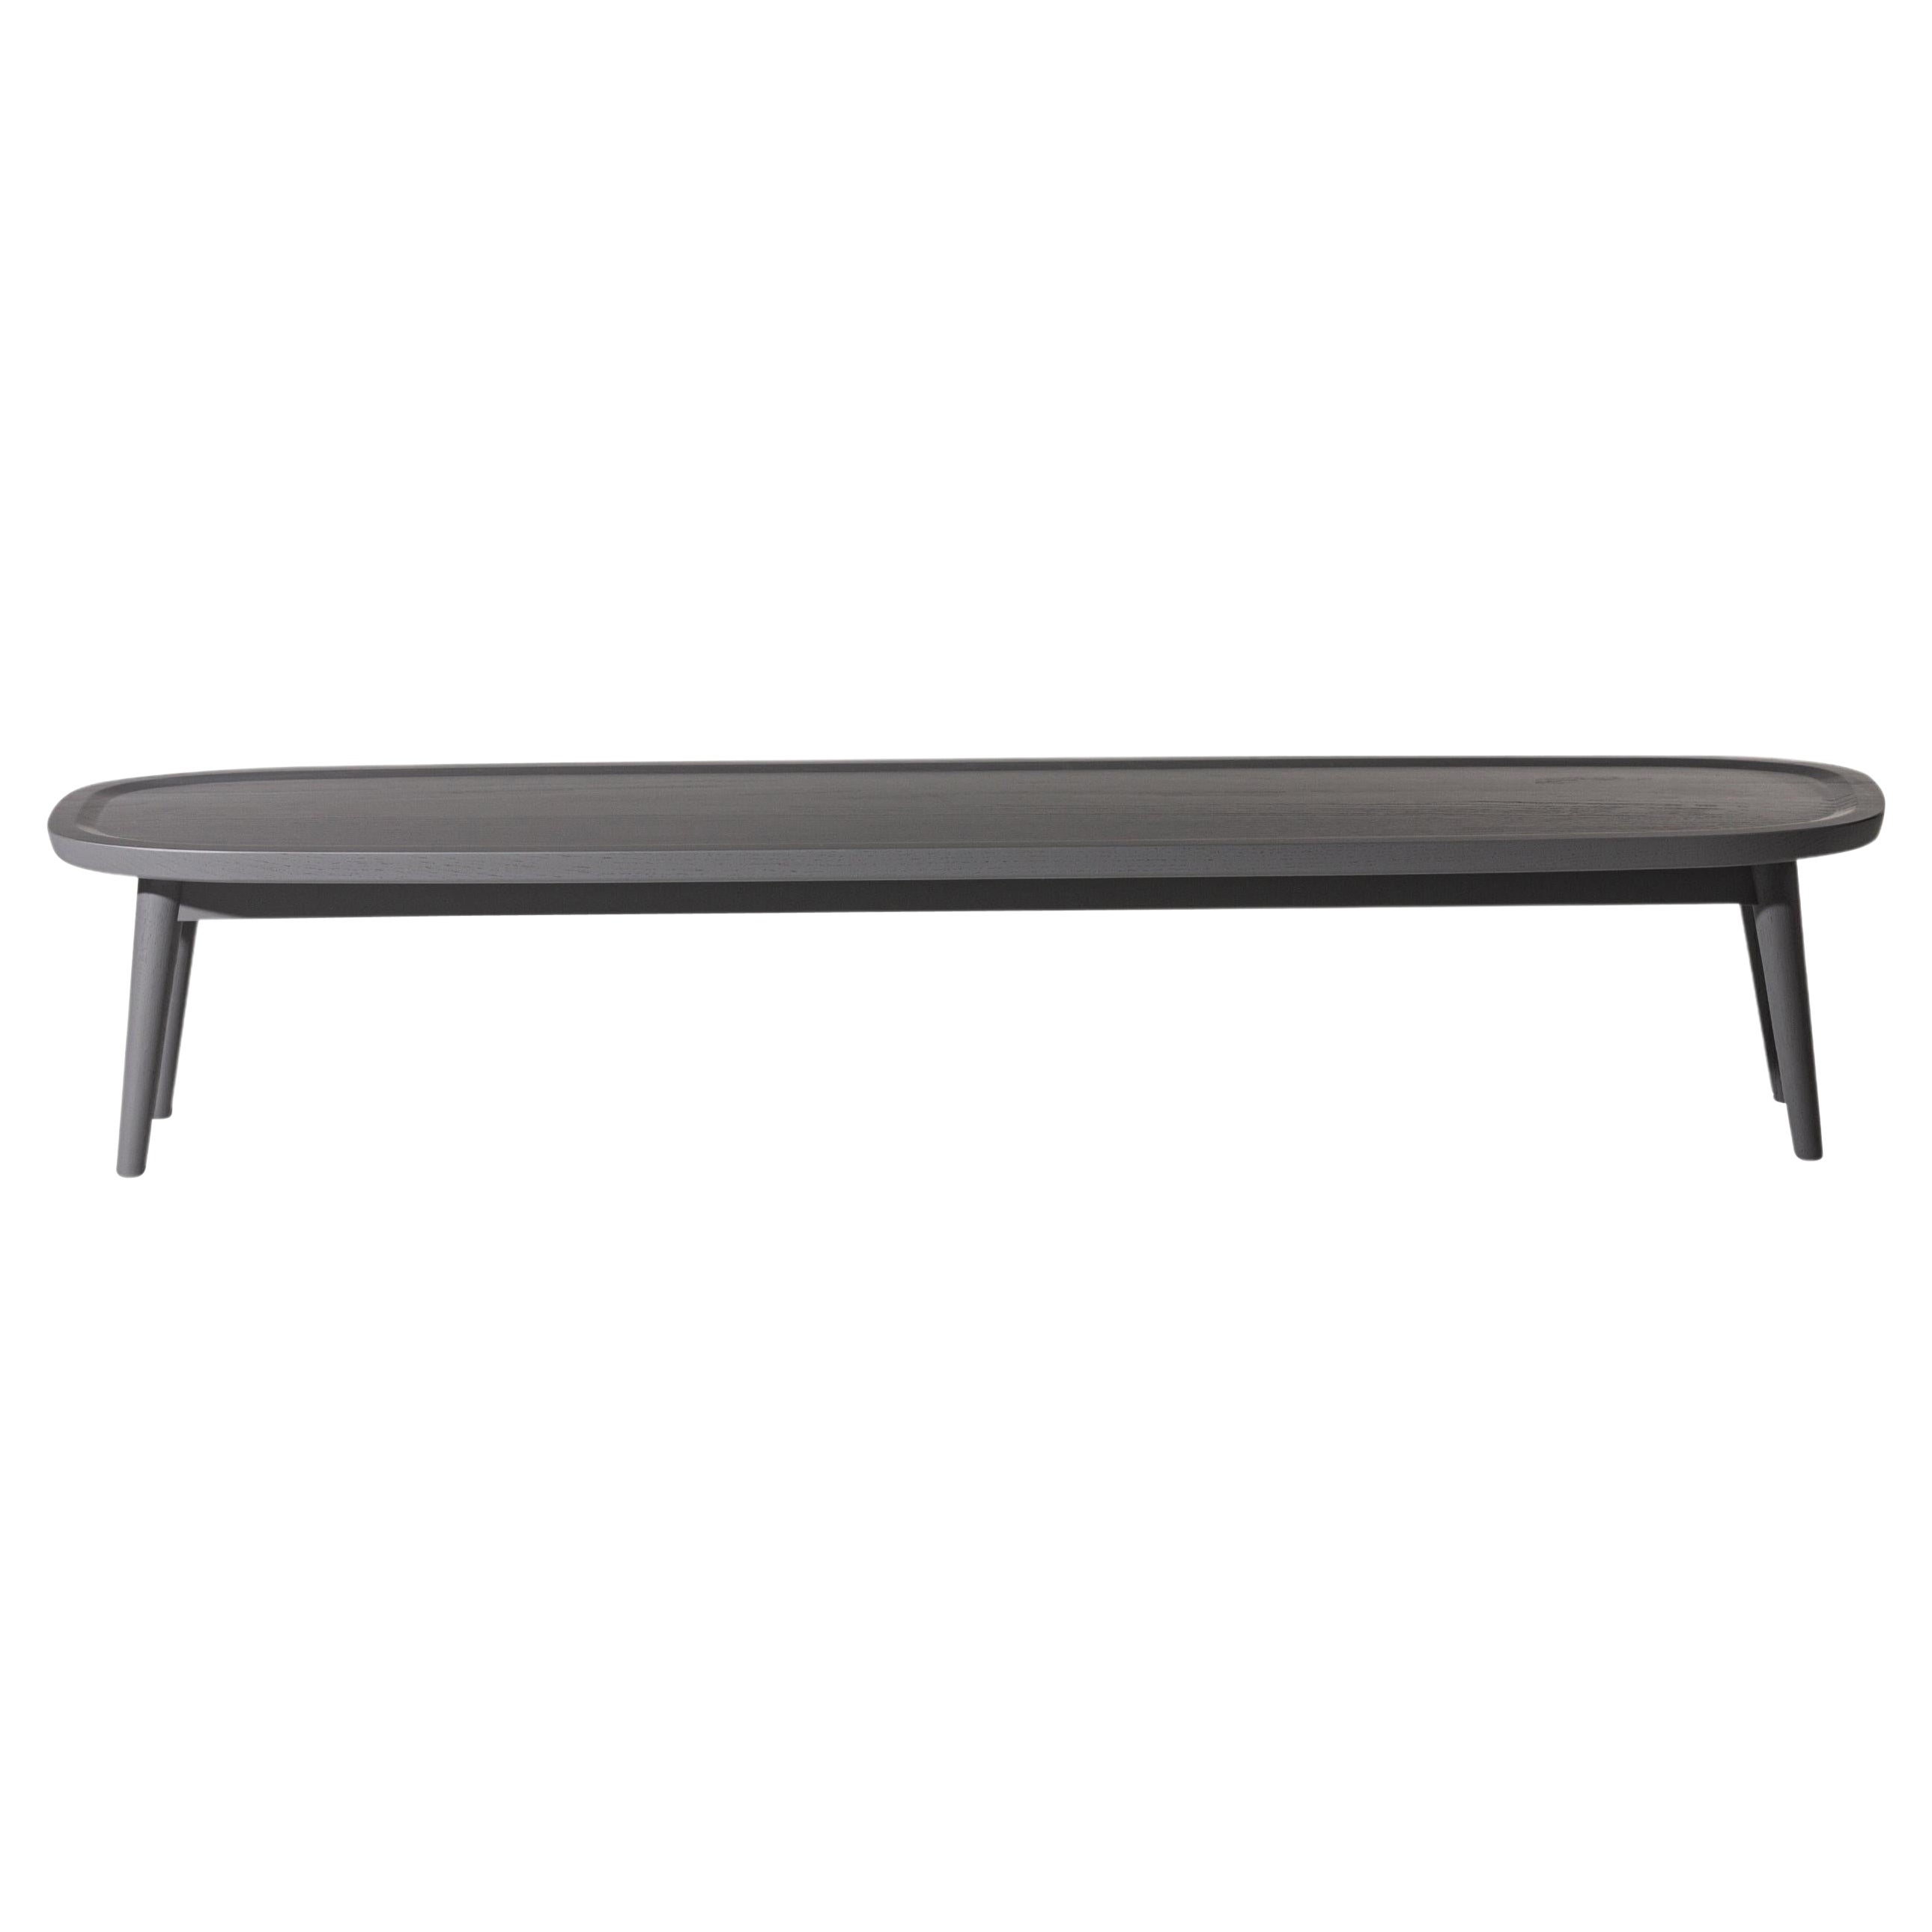 Gervasoni Large Brick Oval Coffee Table in Grey Lacquered Oak by Paola Navone